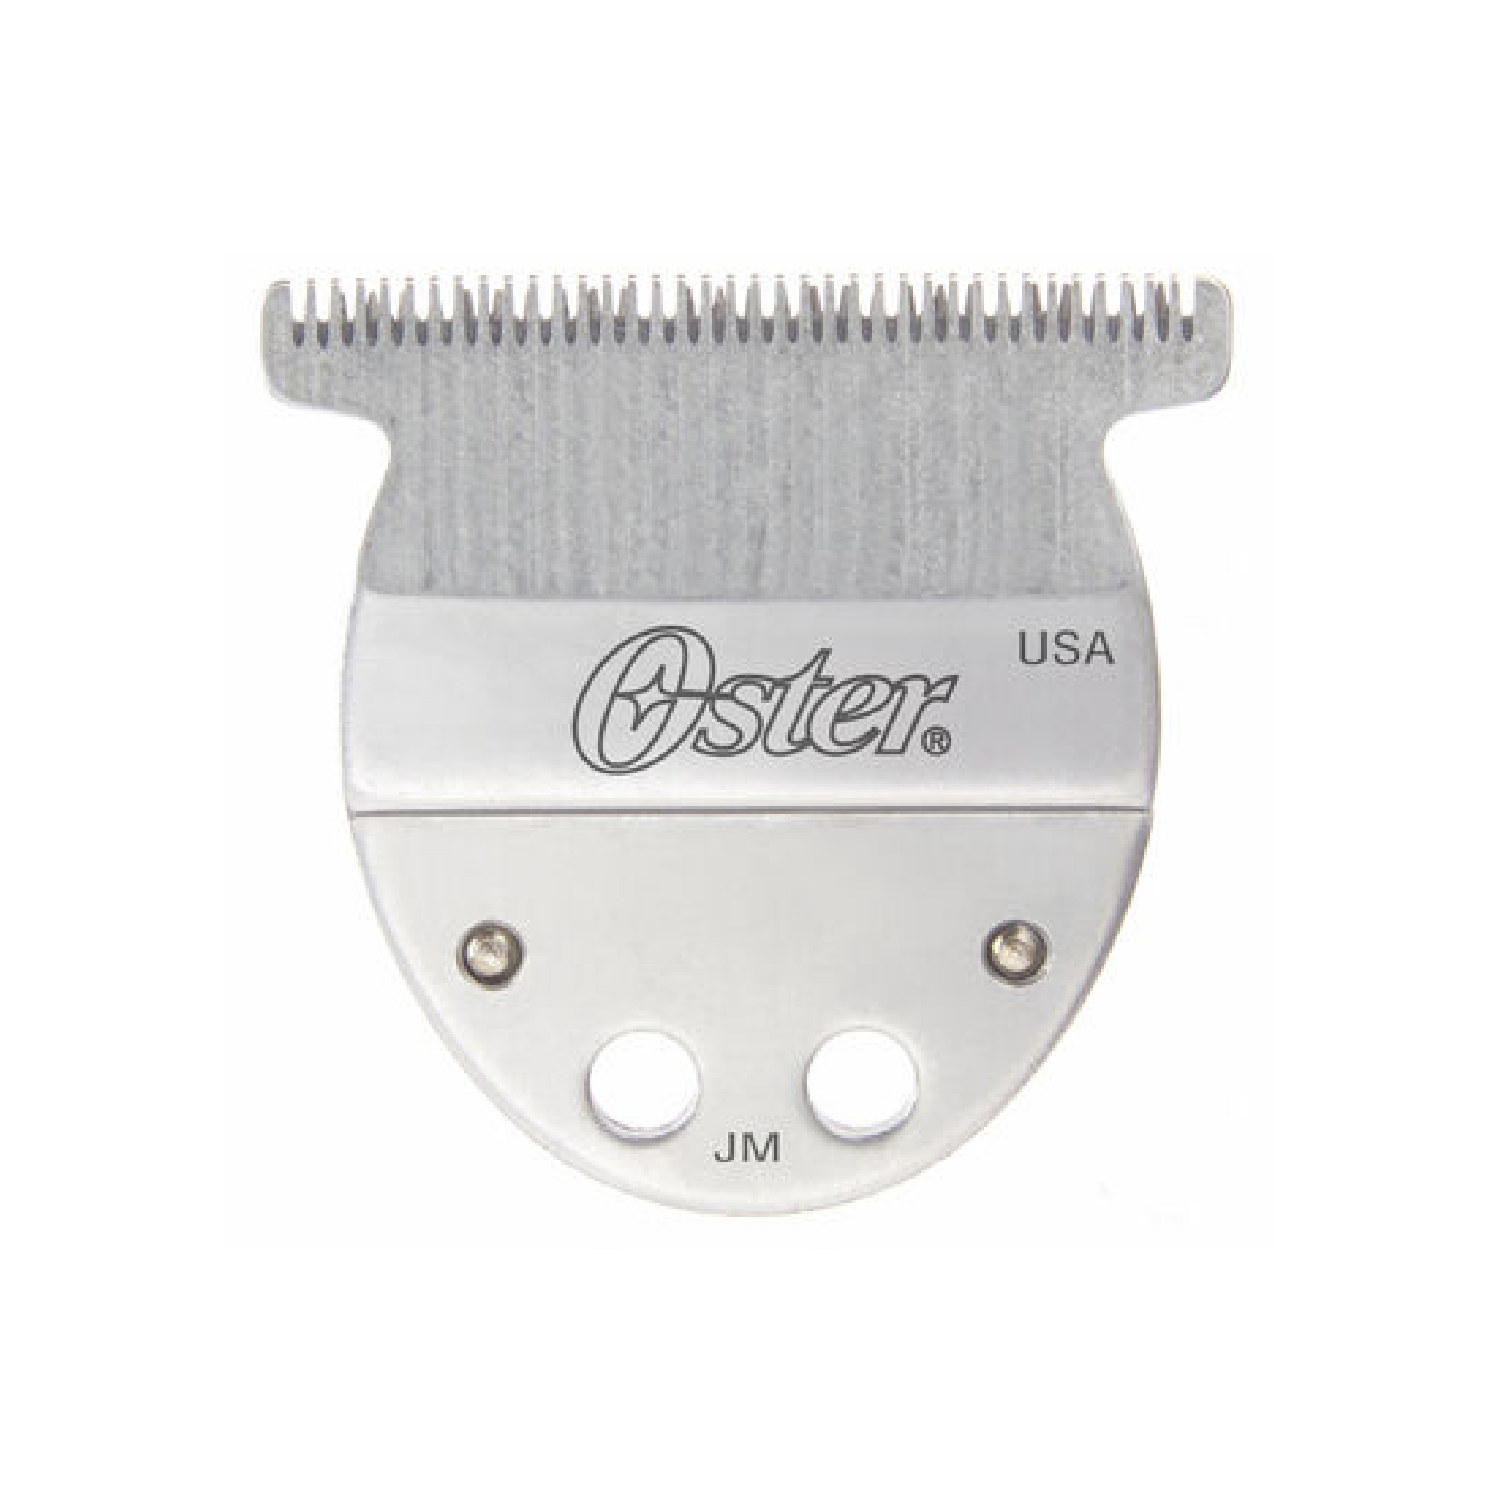 Oster Professional Trimmer T-Blade #76913-586 - Fits T-Finisher